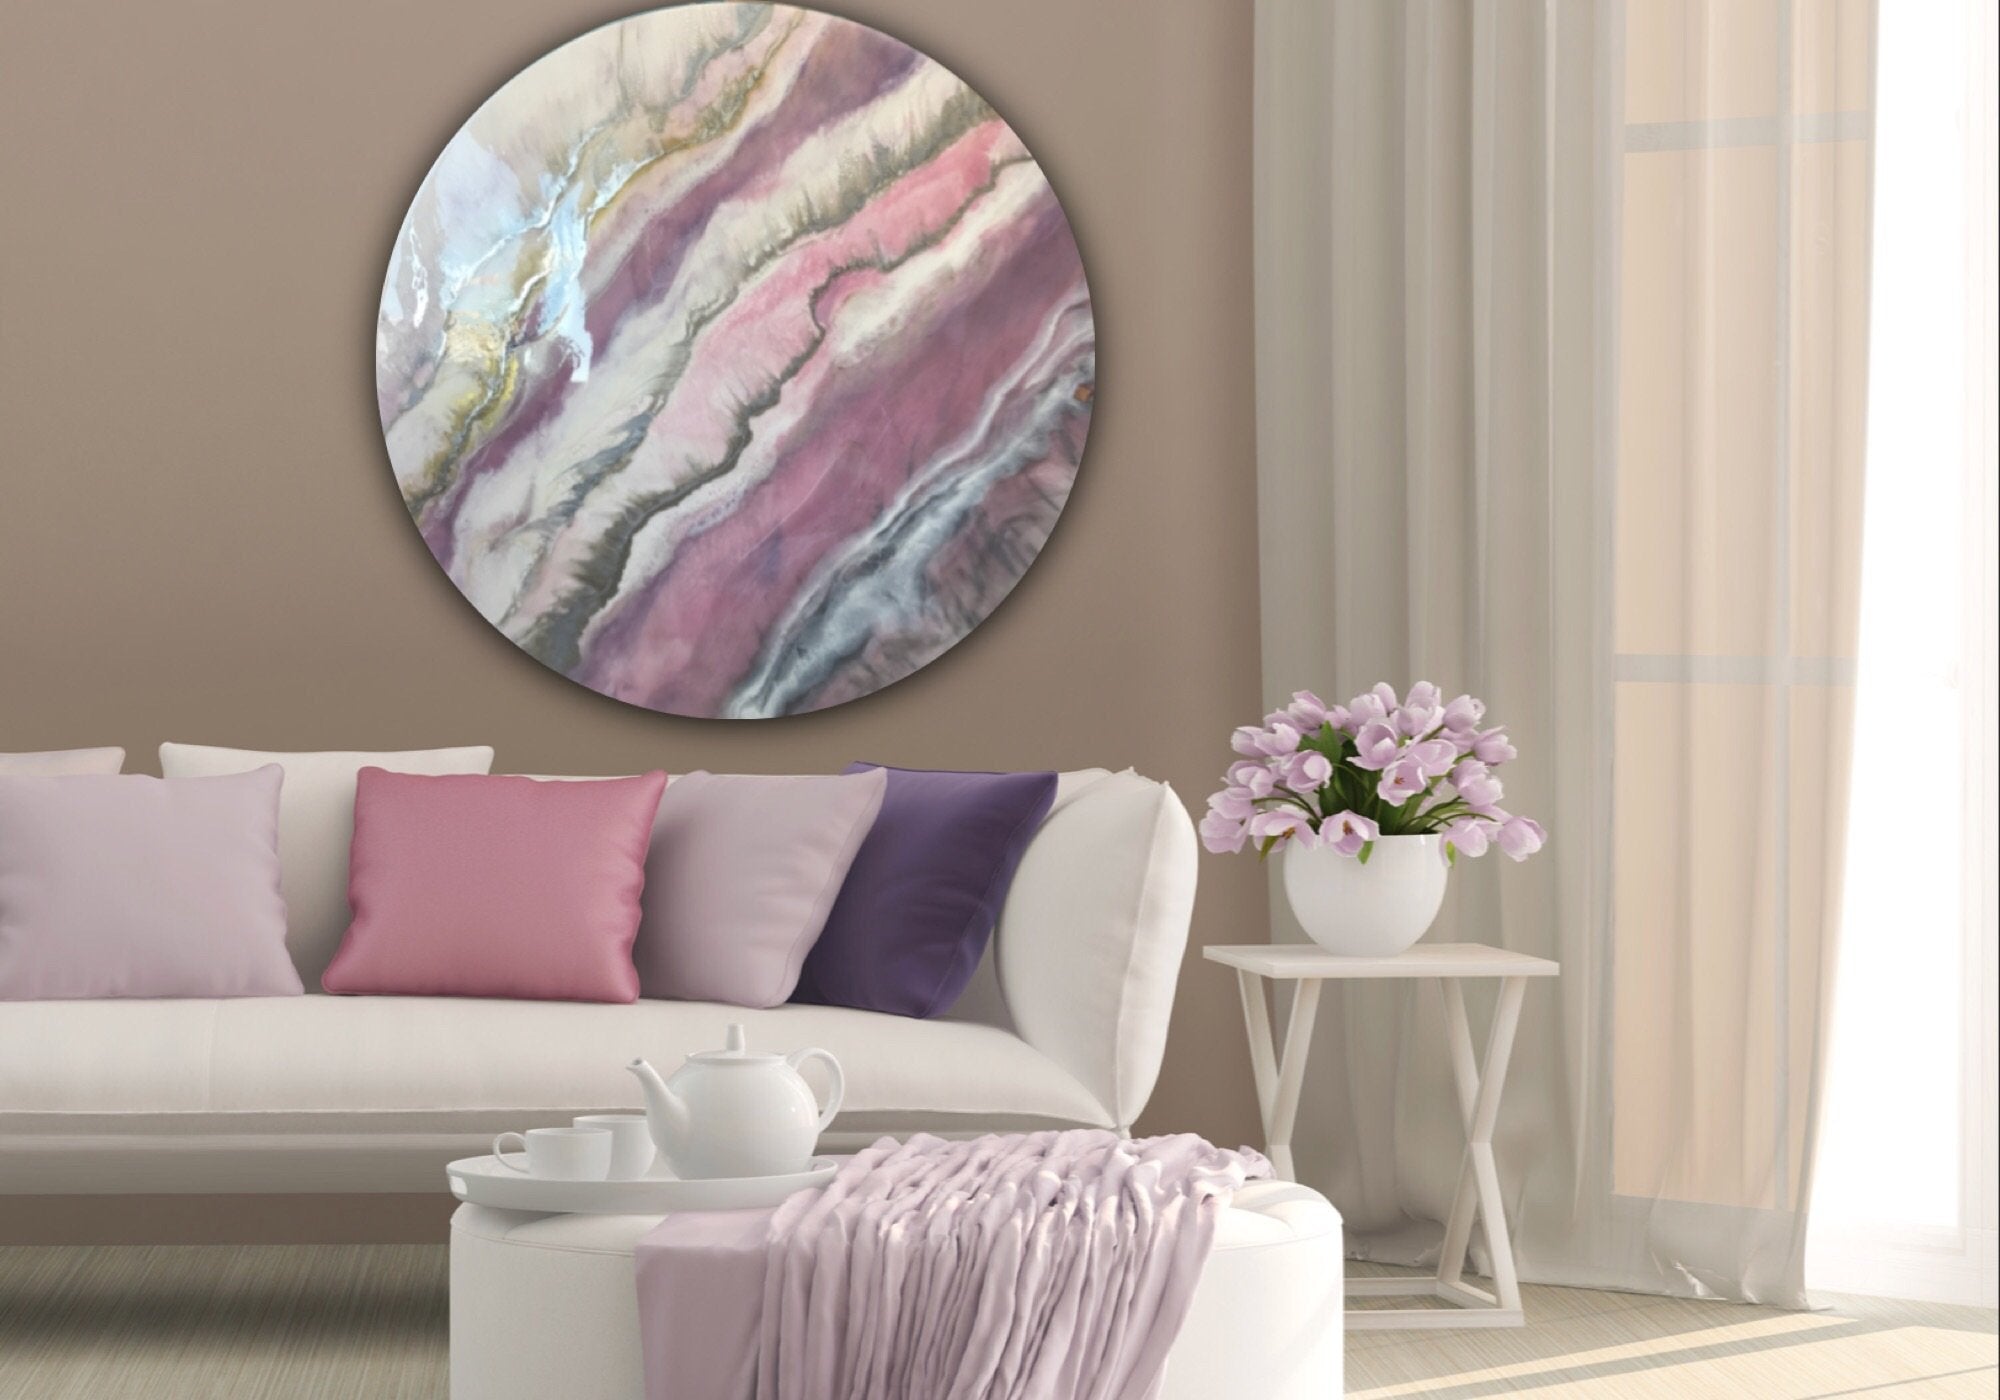 8 Blush Sands. Round Acrylic Perspex Print. Antuanelle